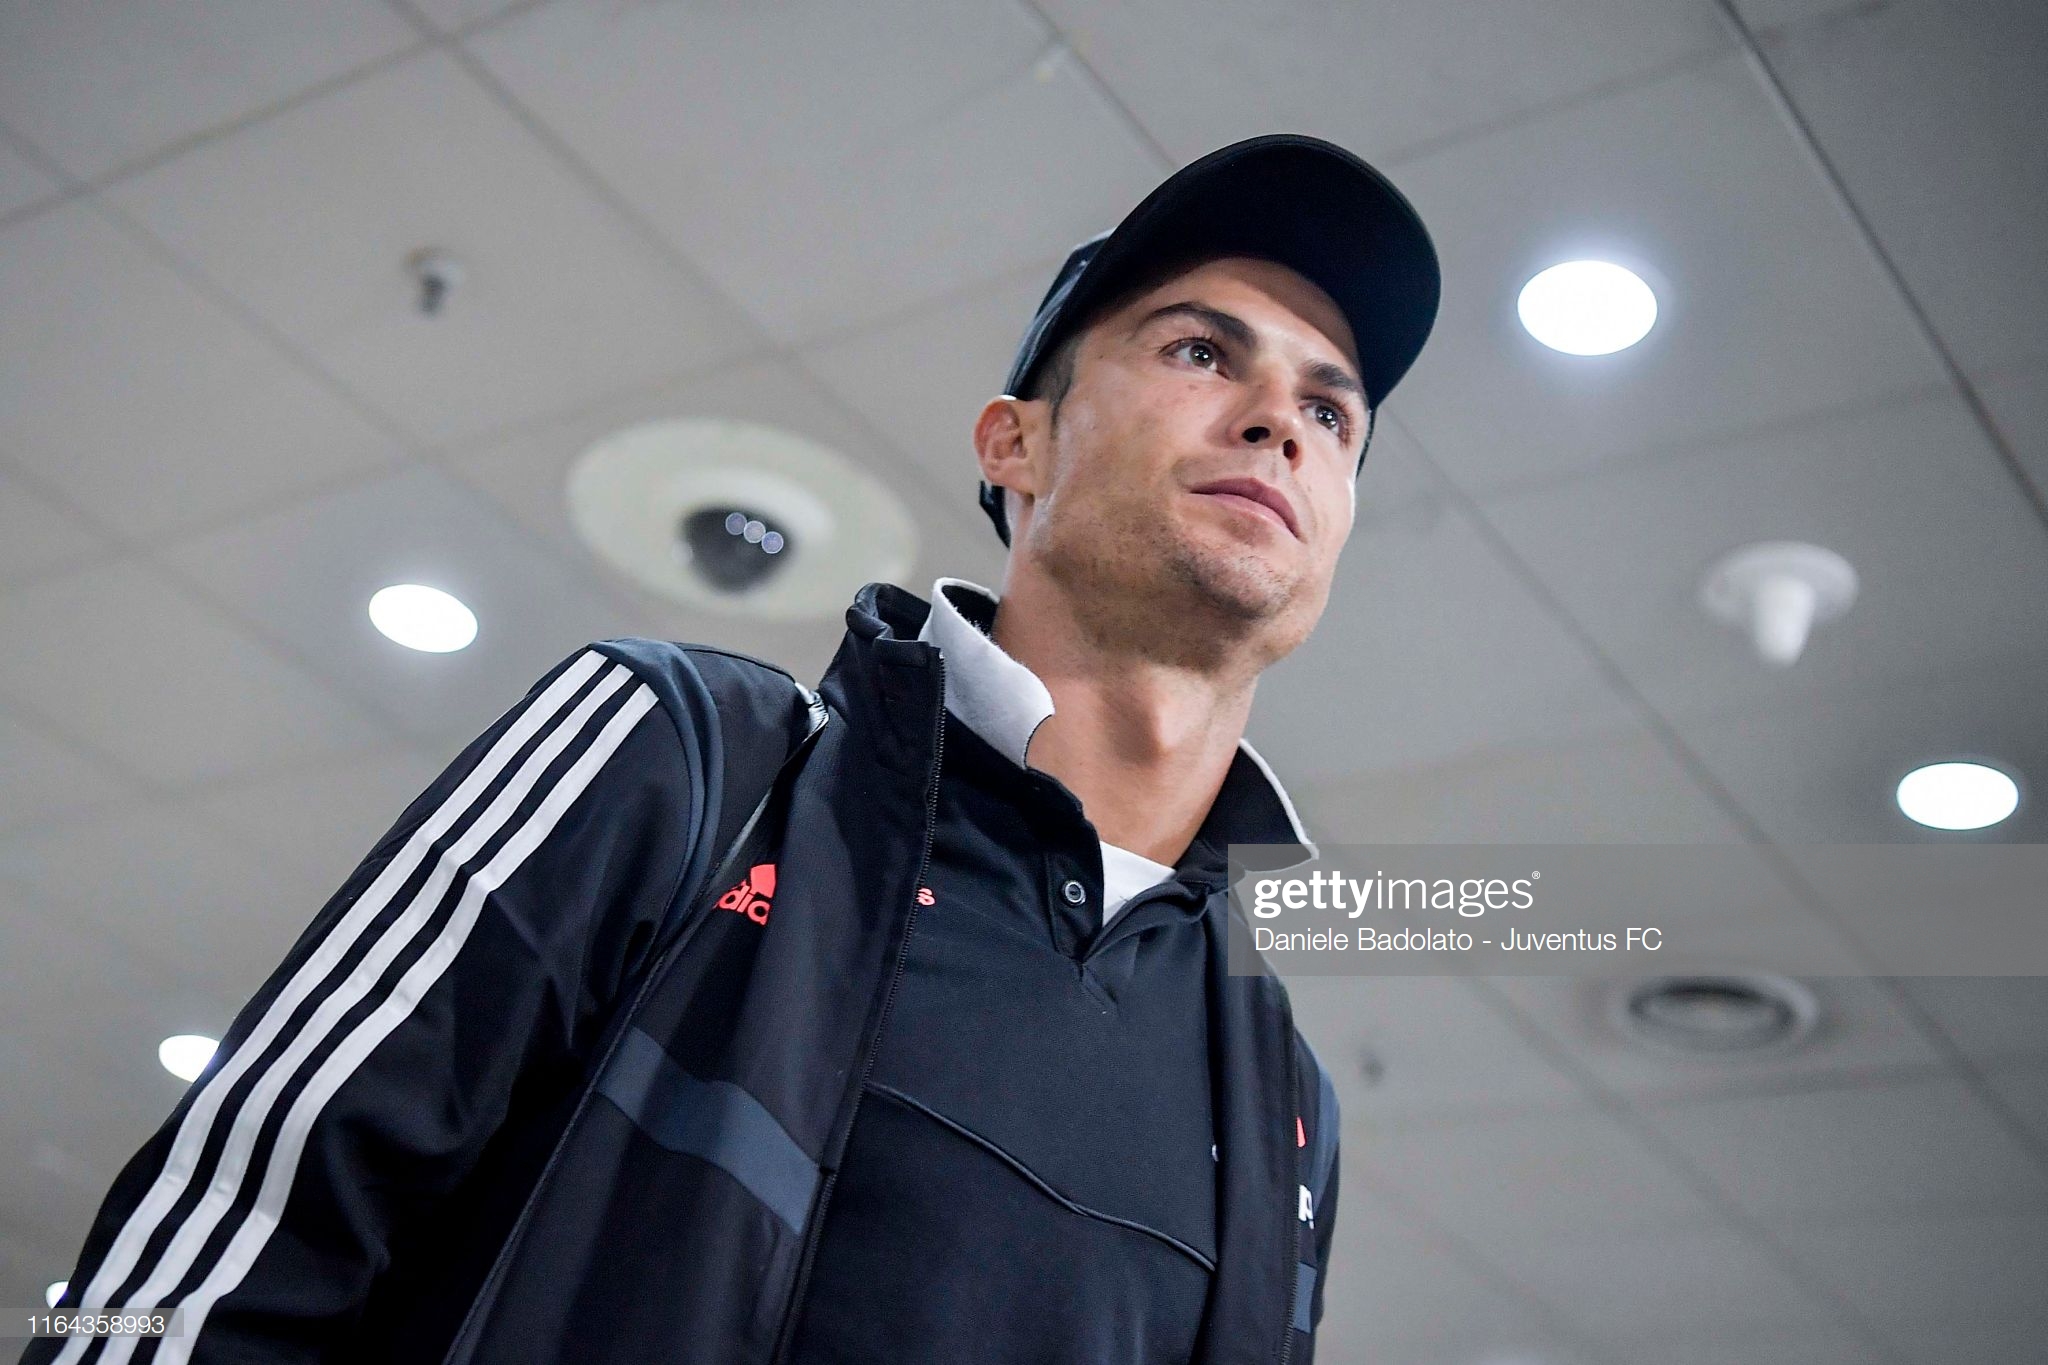 gettyimages-1164358993-2048x2048.jpg